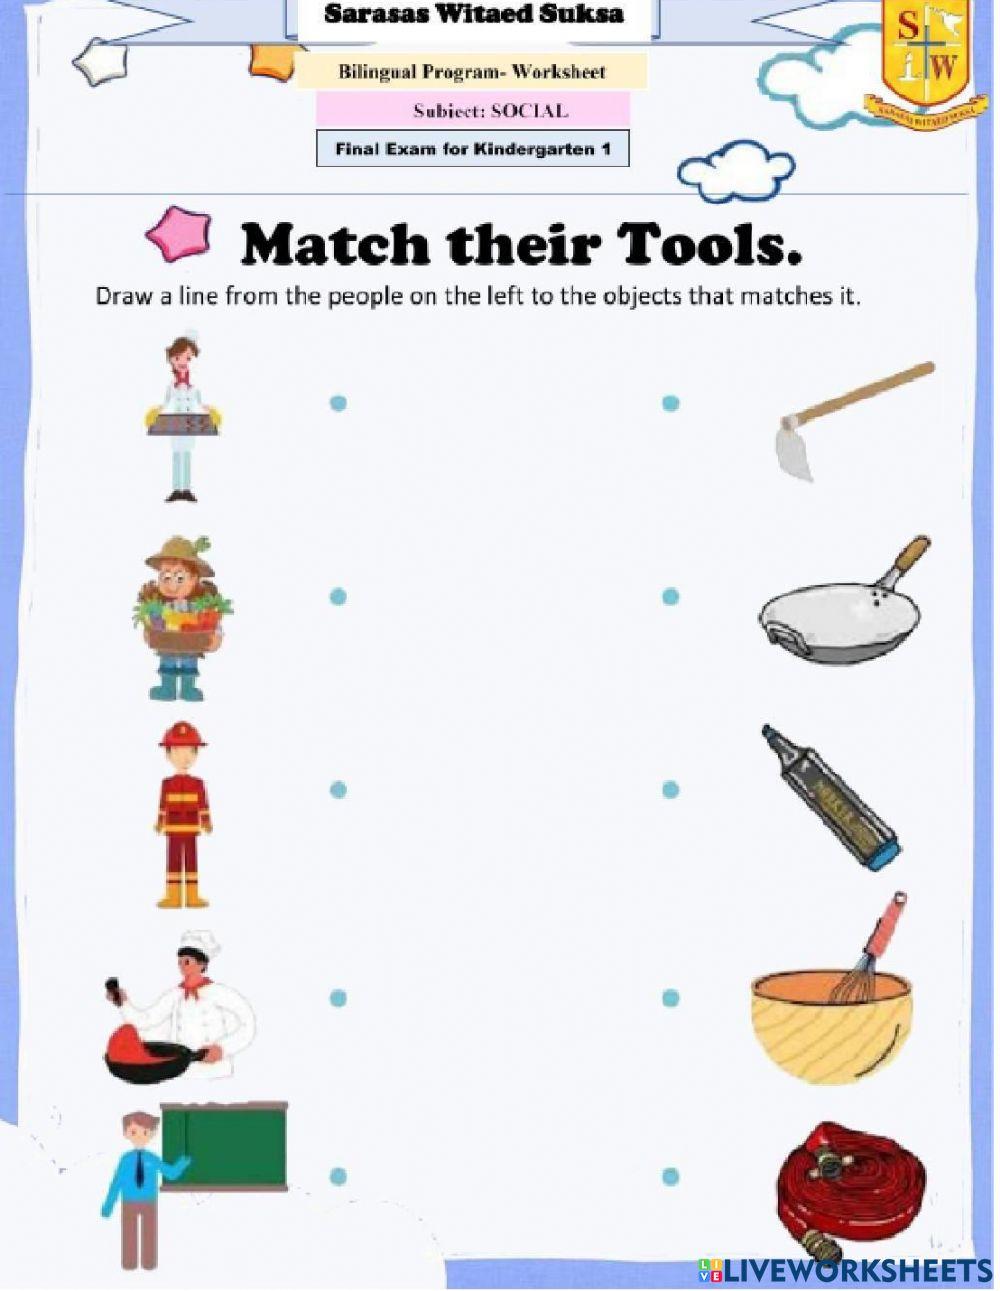 Match their Tools